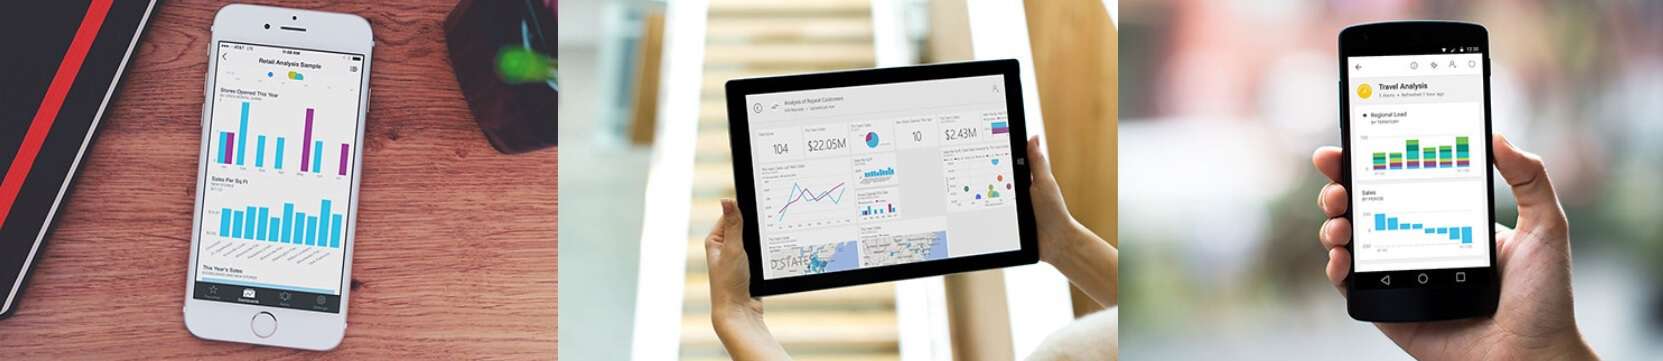 Power BI Mobile App for iOS gets update, grabs parity with Windows 10 Mobile app - OnMSFT.com - January 20, 2016